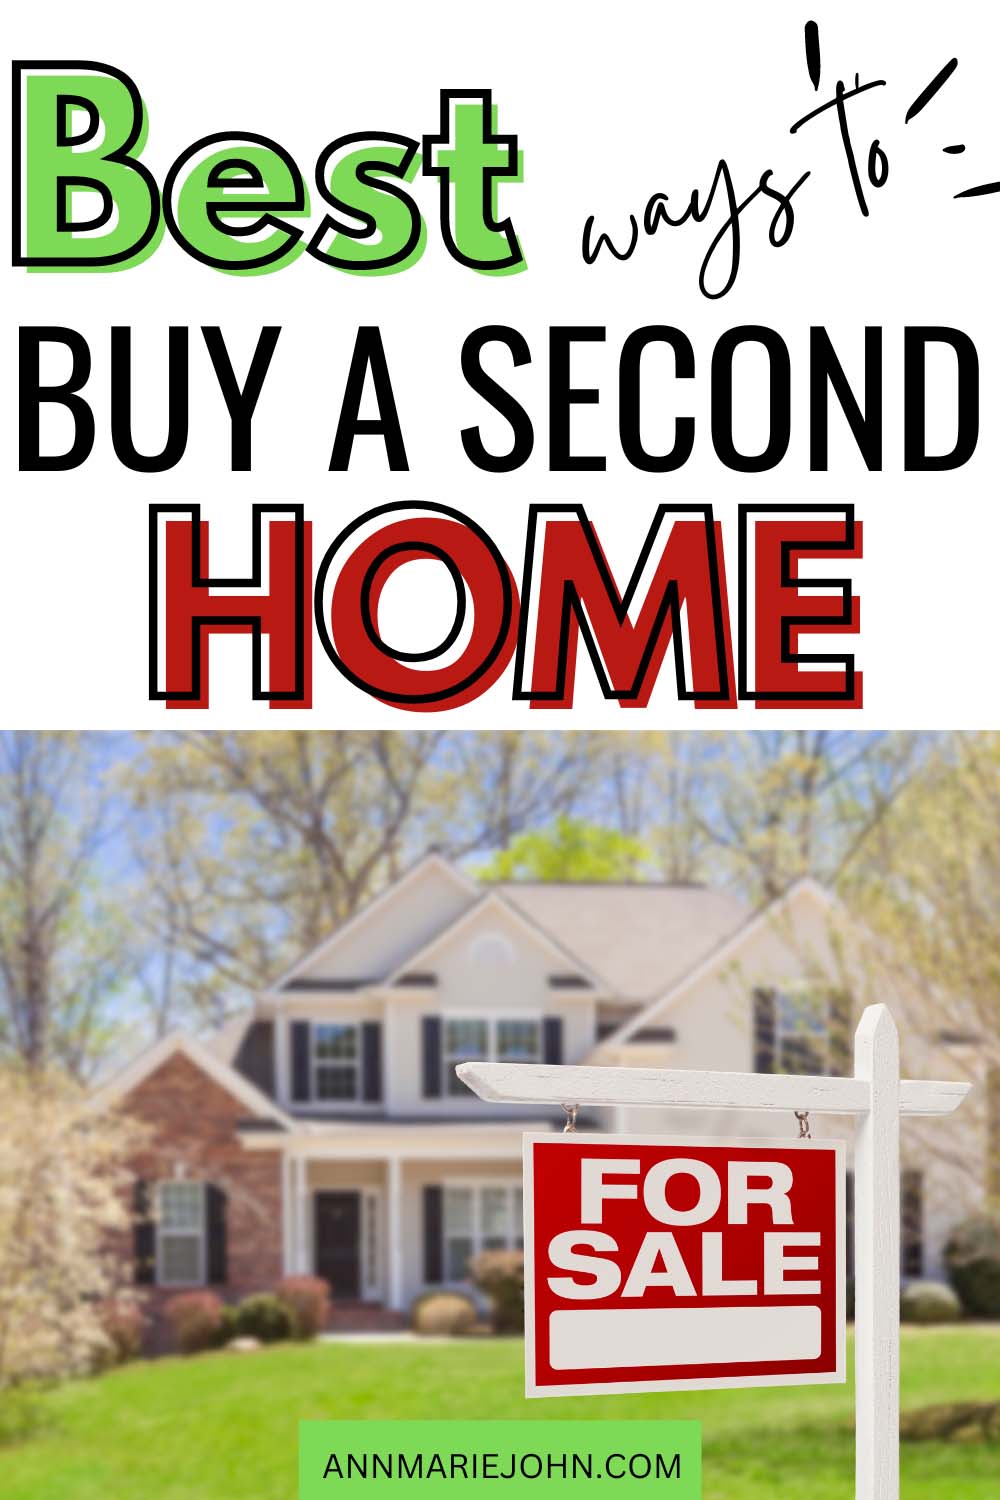 Best Ways to Buy a Second Home